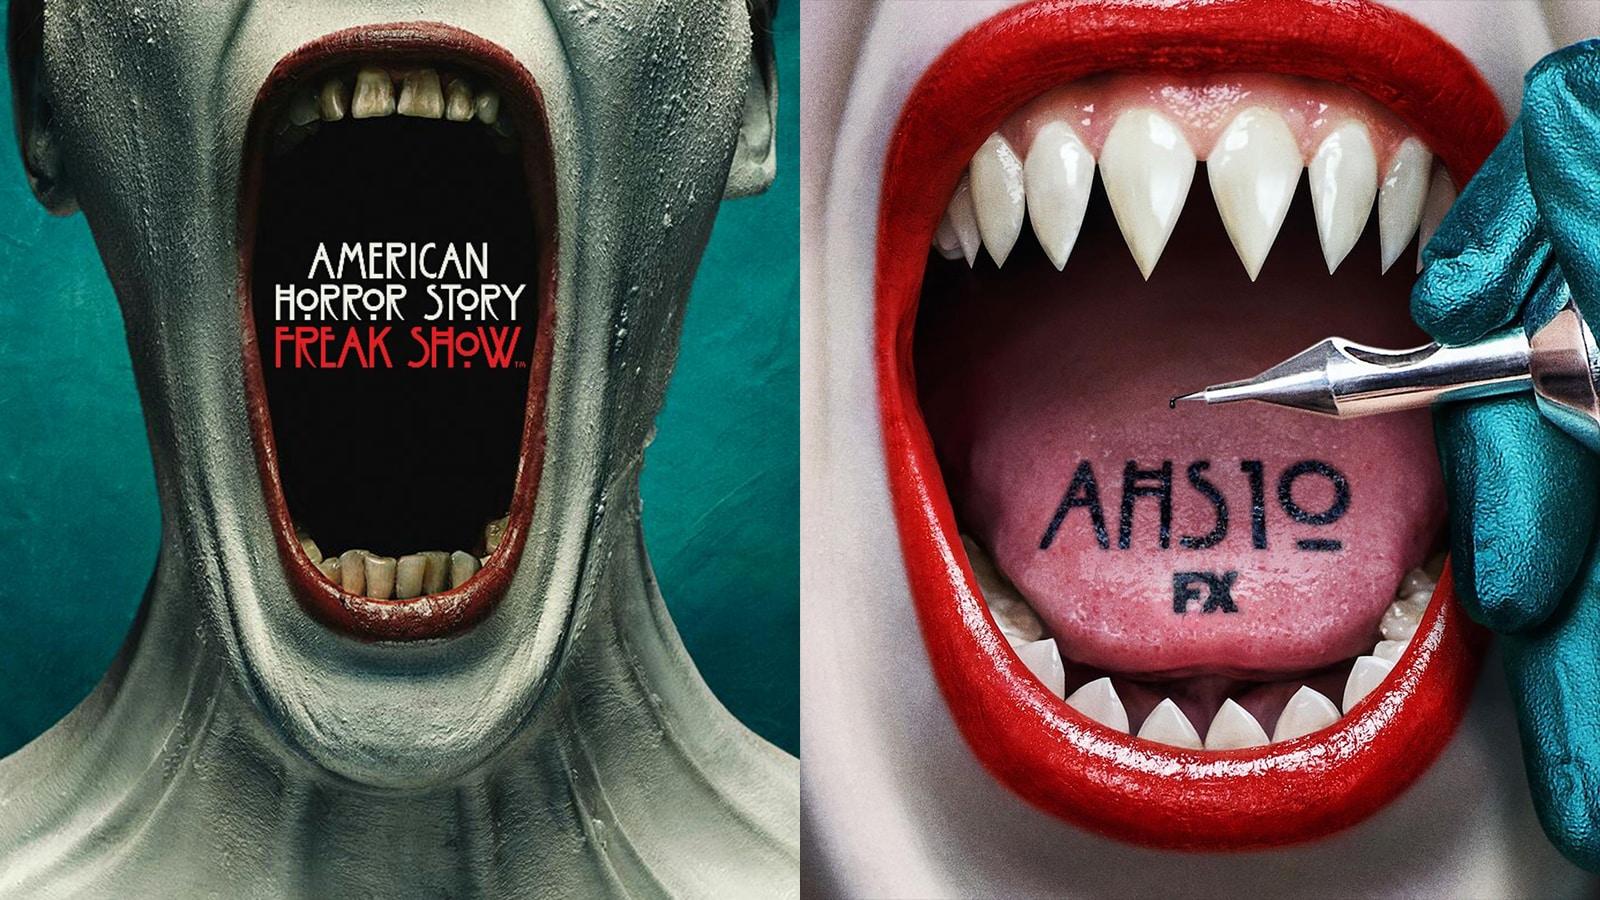 American Horror Story Season 10 and Freak Show posters